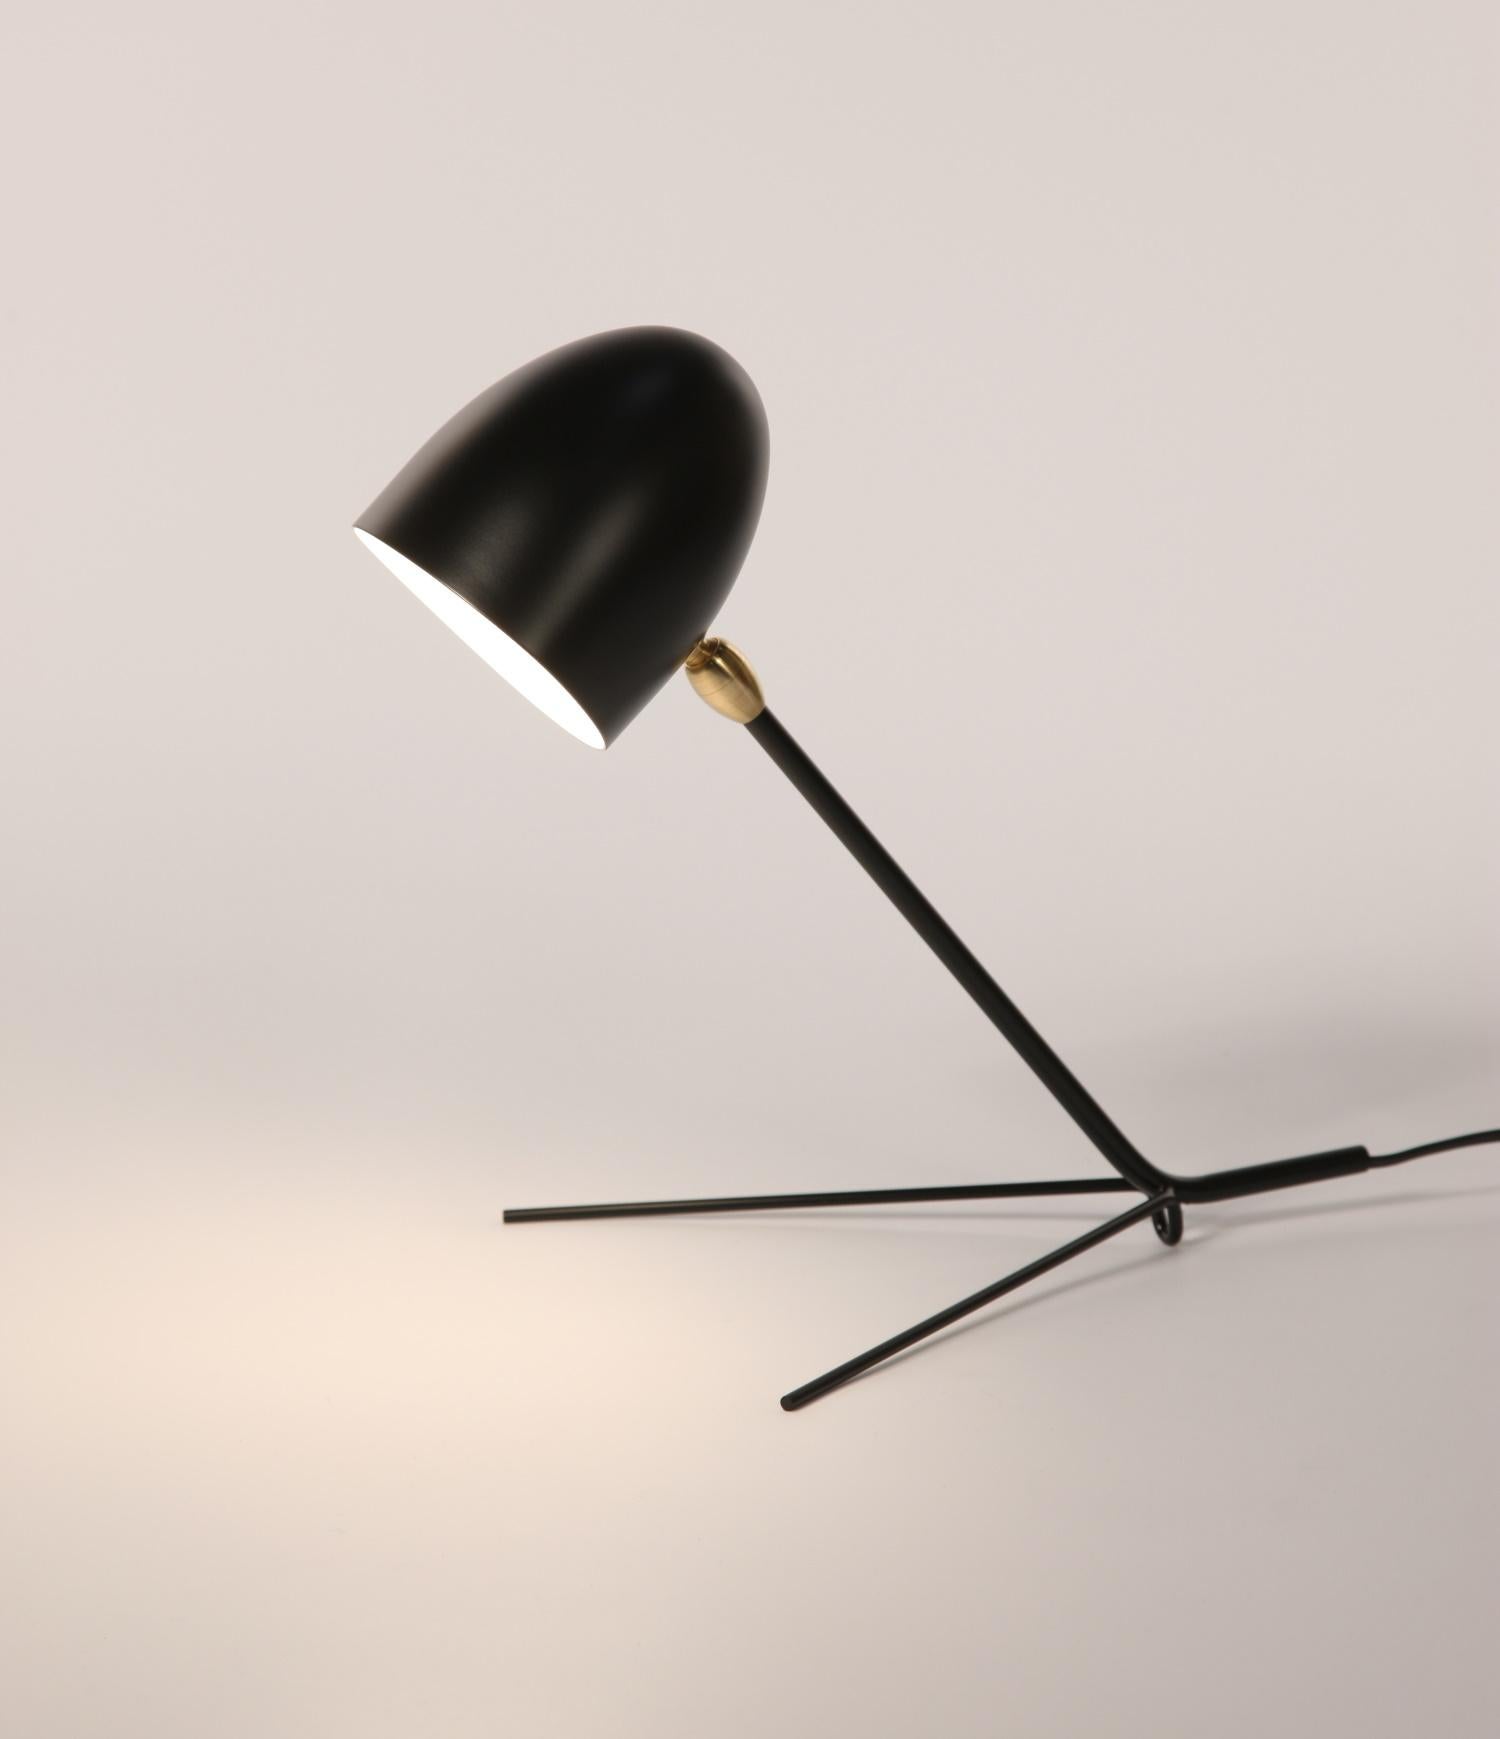 DESCRIPTION:
This desk lamp is a certified re-edition, produced by the family of Serge Mouille on the site of his original workshop.

An elegant triangular base supporting a slender, straight arm and cylindrical shade allows this deceivingly simple